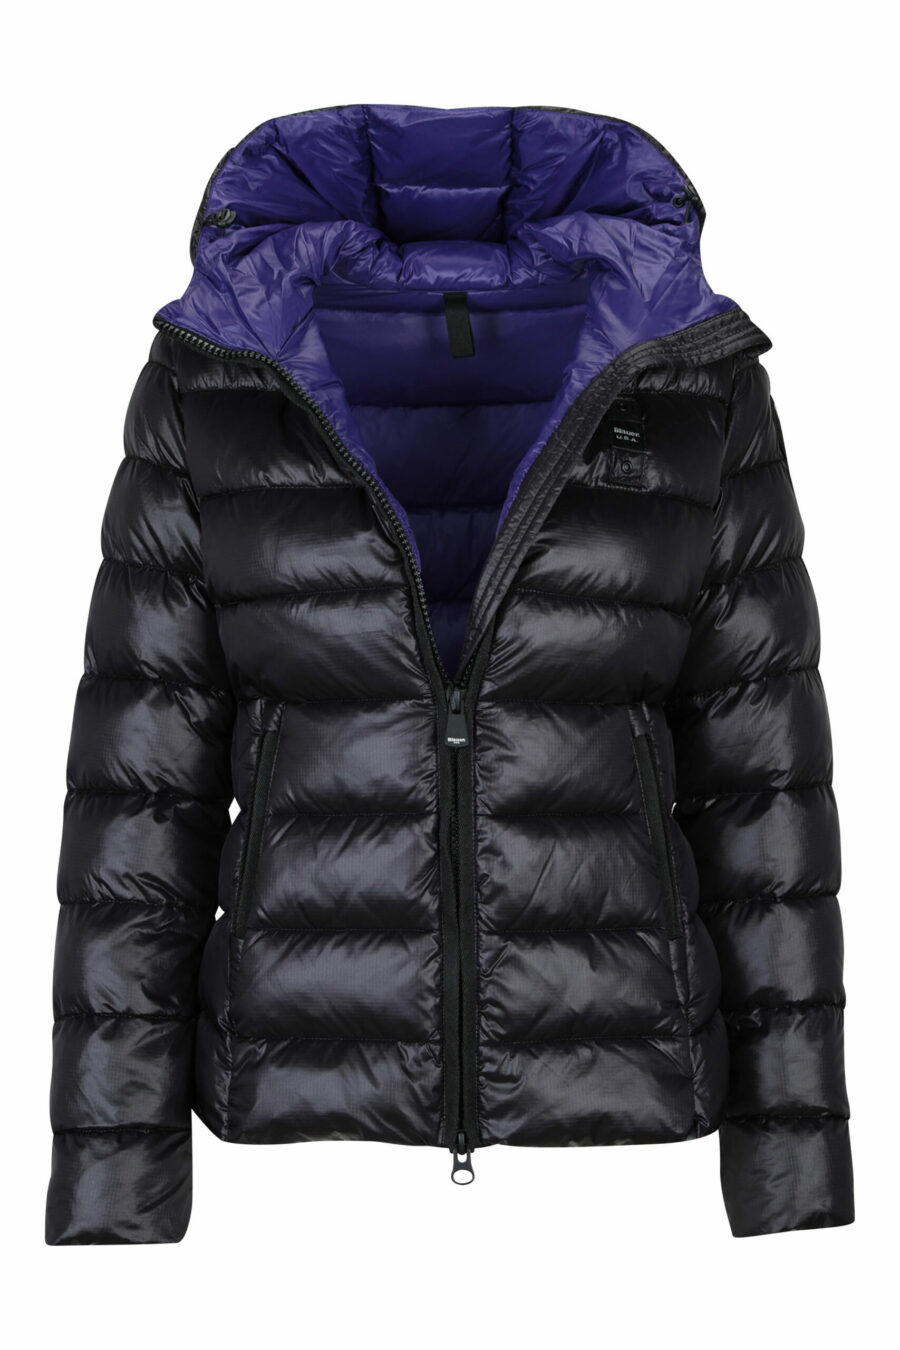 Black straight lined hooded jacket with purple inside with logo patch - 8058610683146 1 scaled